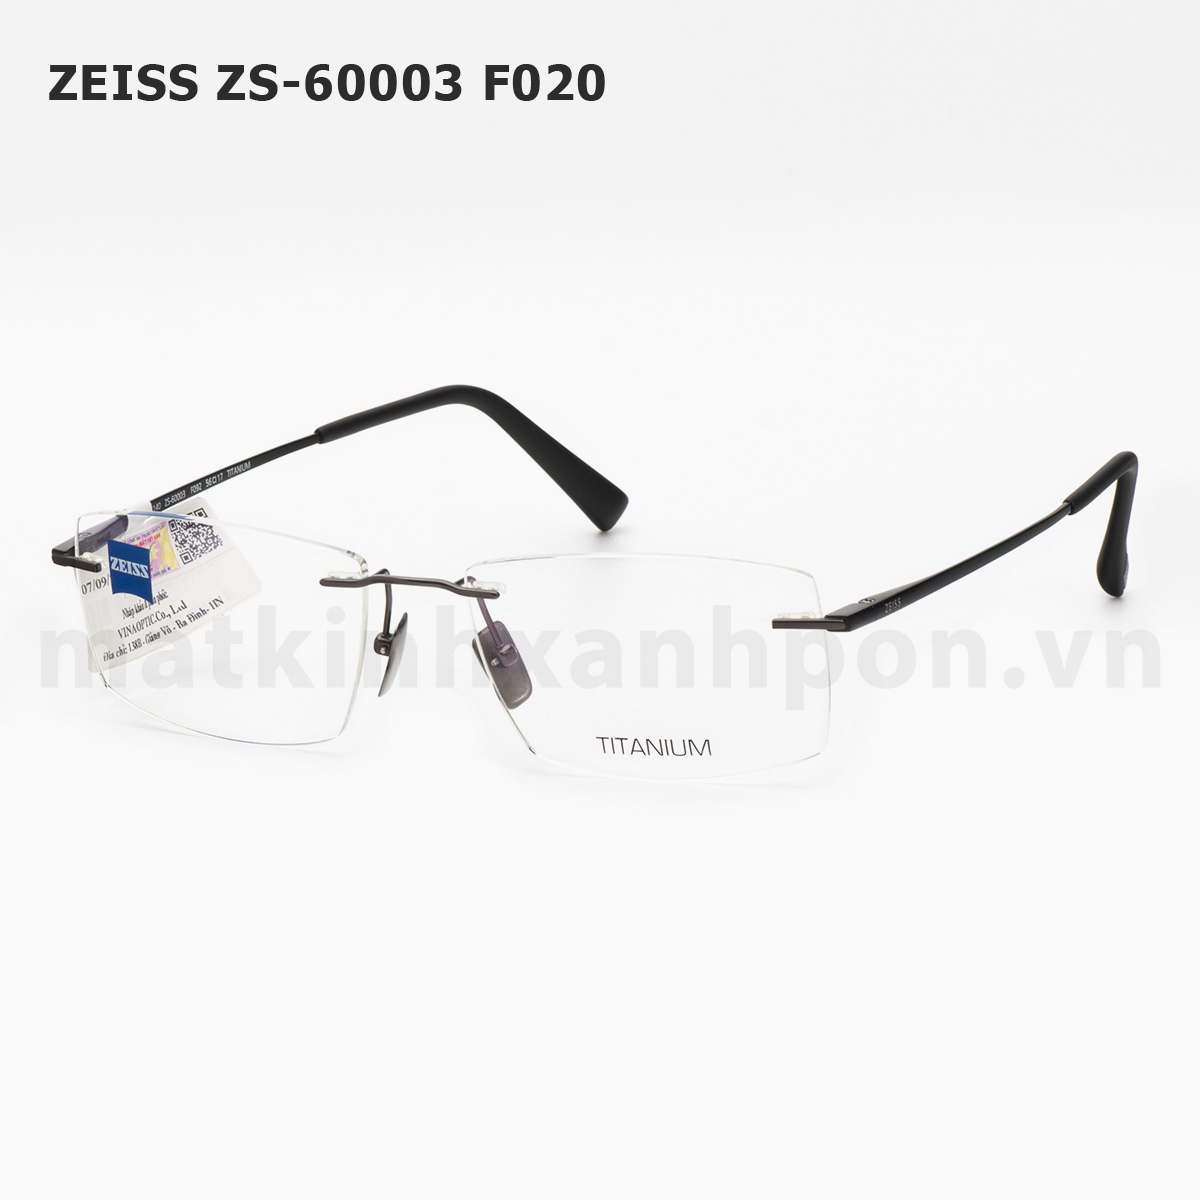 Zeiss ZS-60003 F020